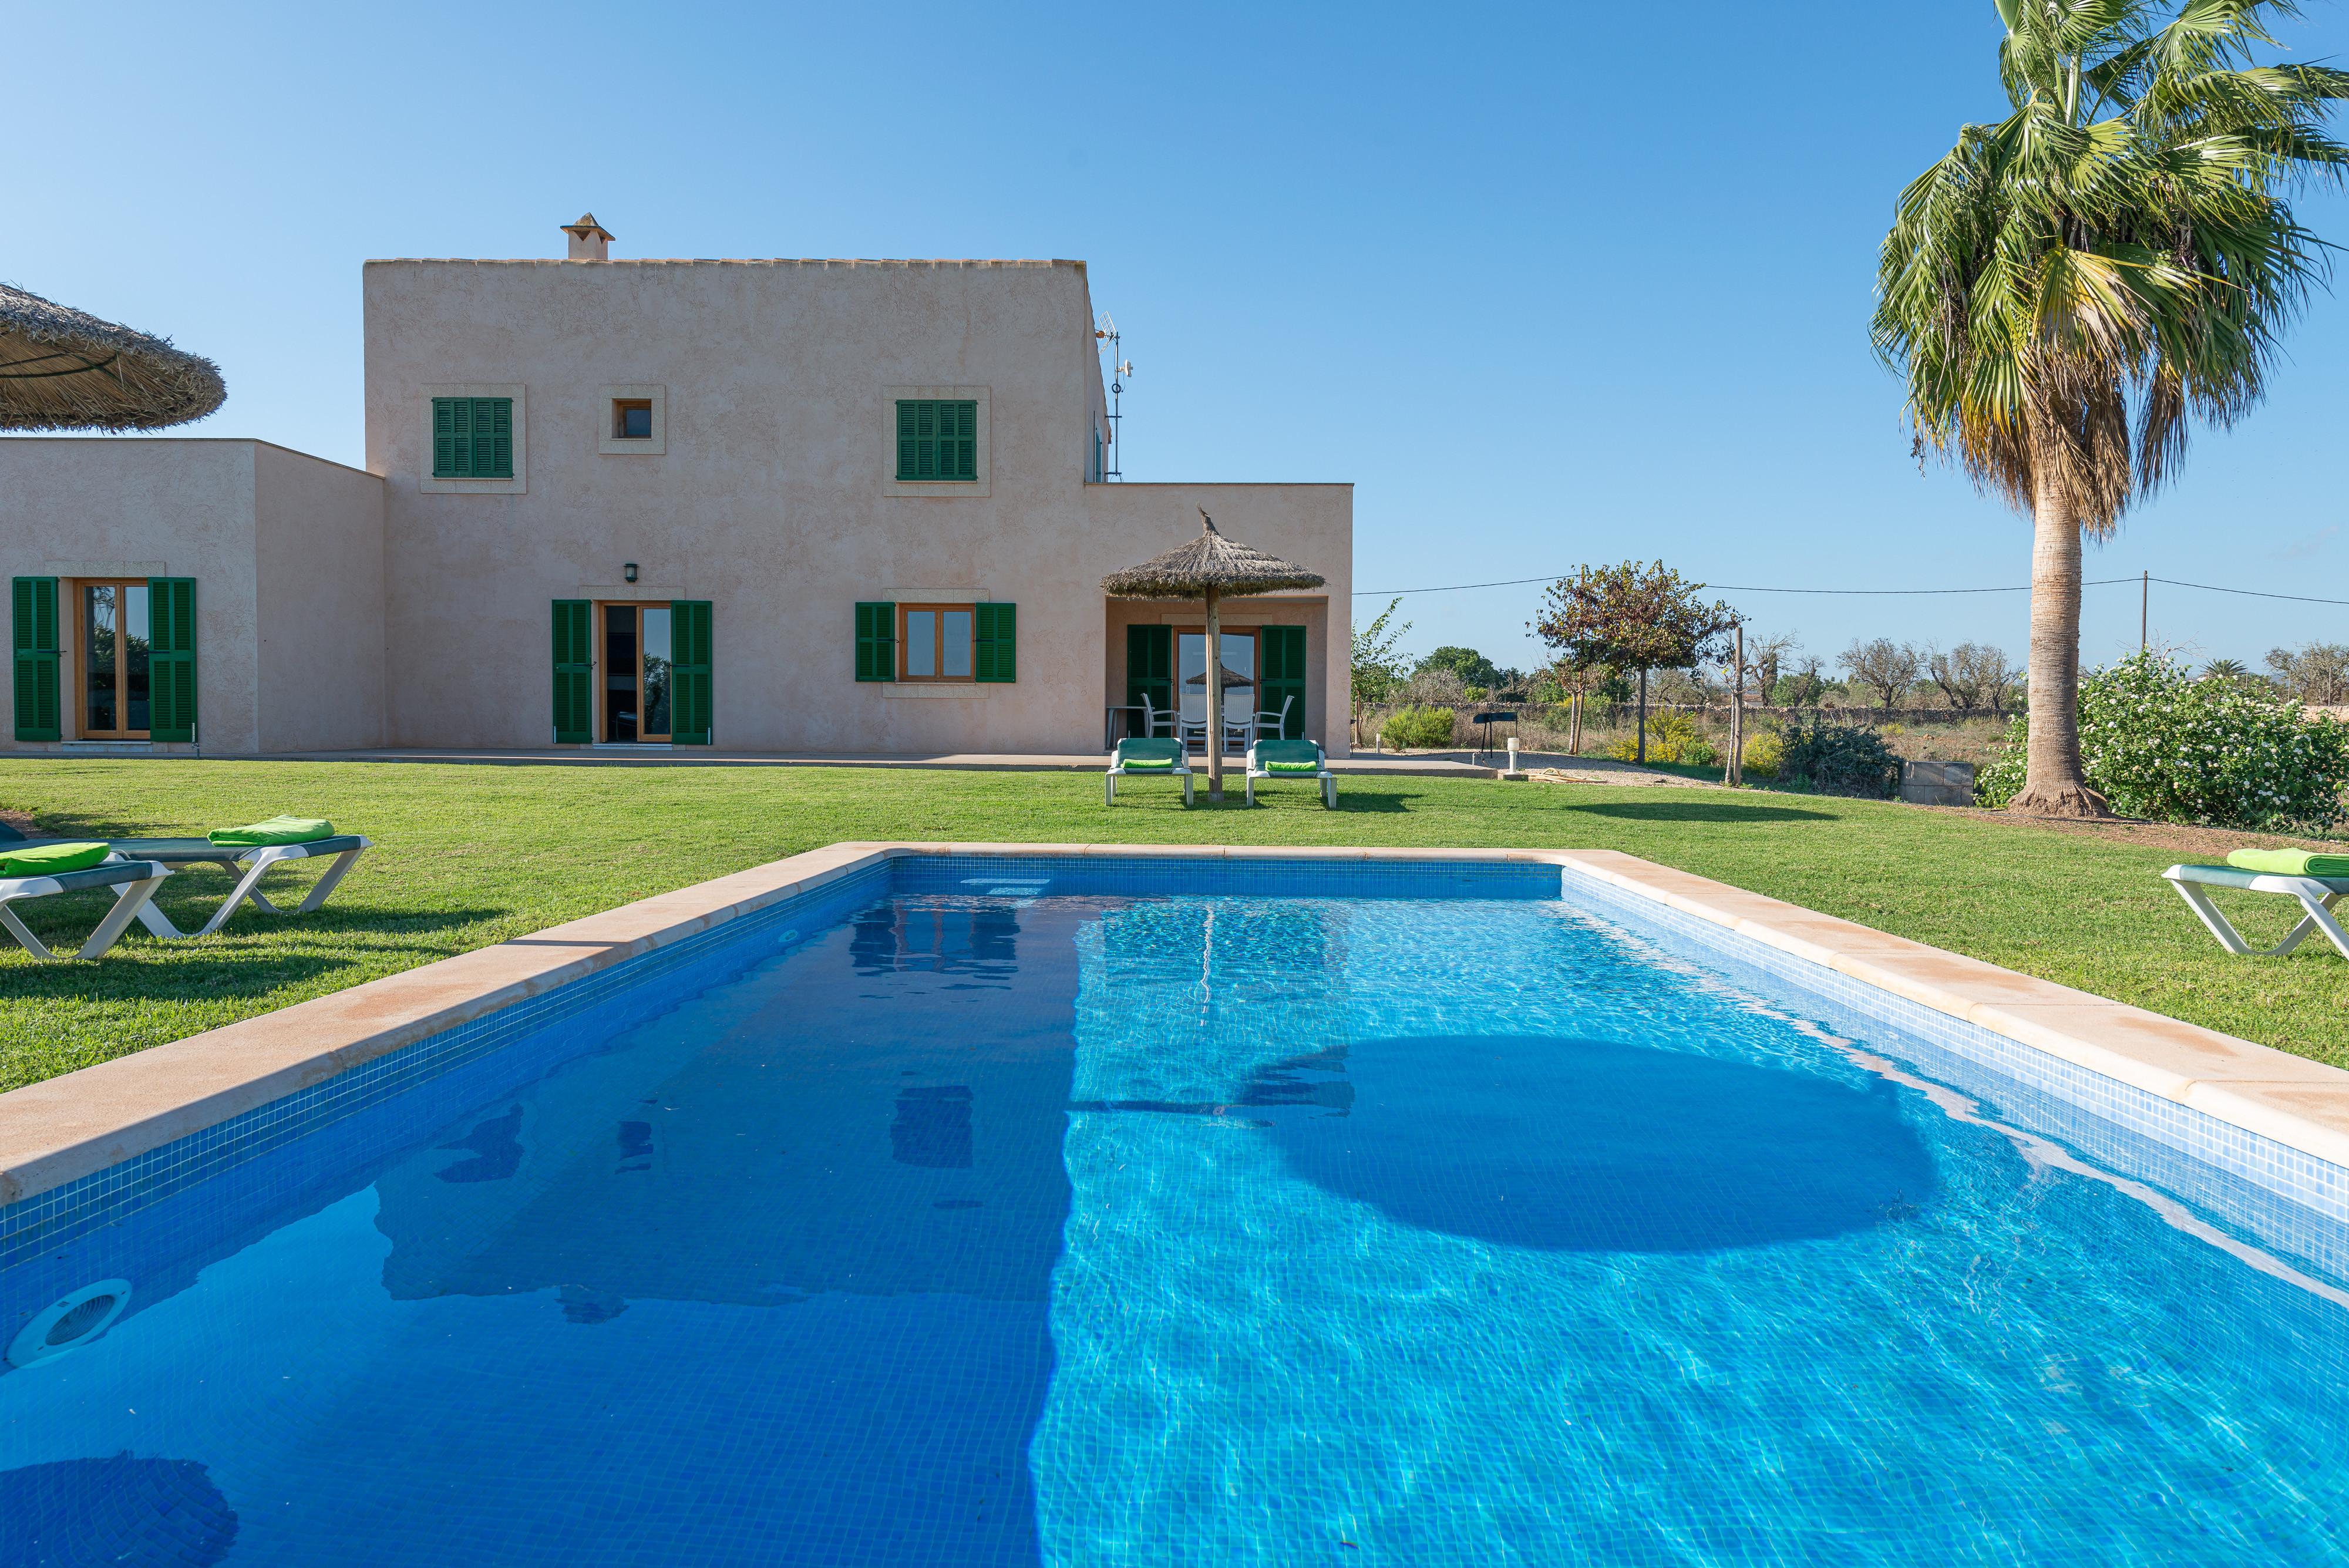 Property Image 1 - SA CARROTJA - Wonderful villa with private pool and free WiFi.